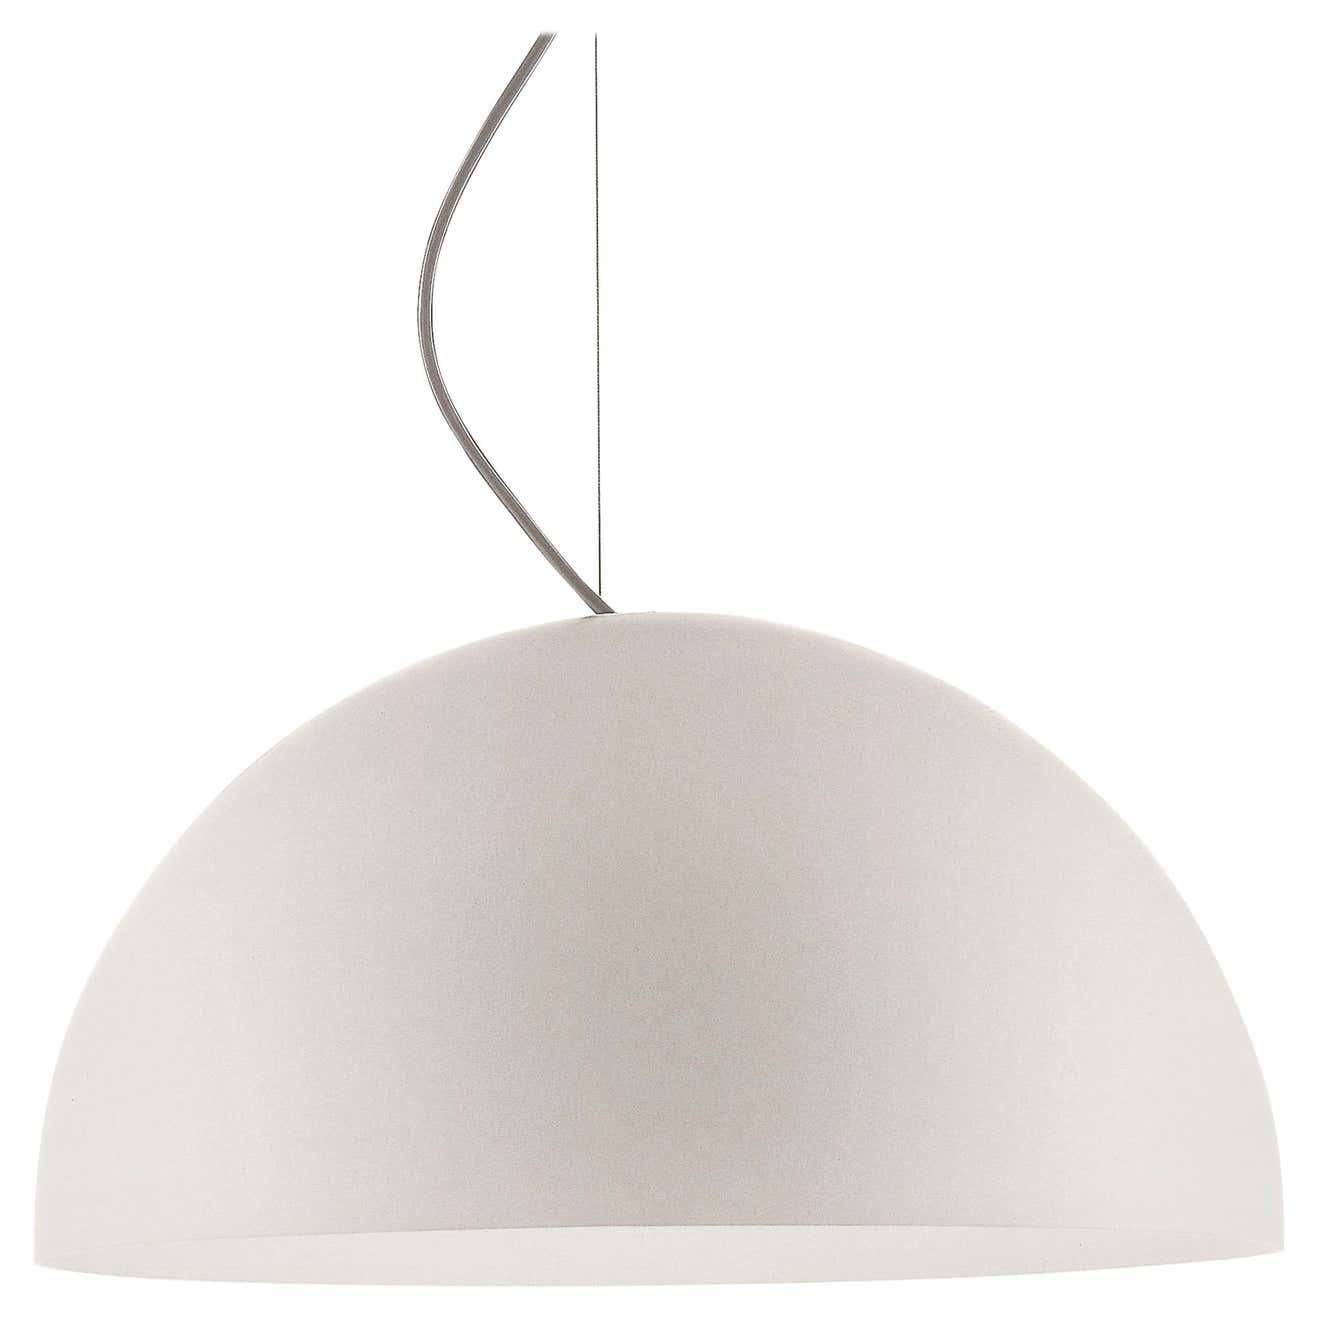 Vico Magistretti Suspension Lamp 'Sonora' Opaline Methacrylate by Oluce In New Condition For Sale In Barcelona, Barcelona